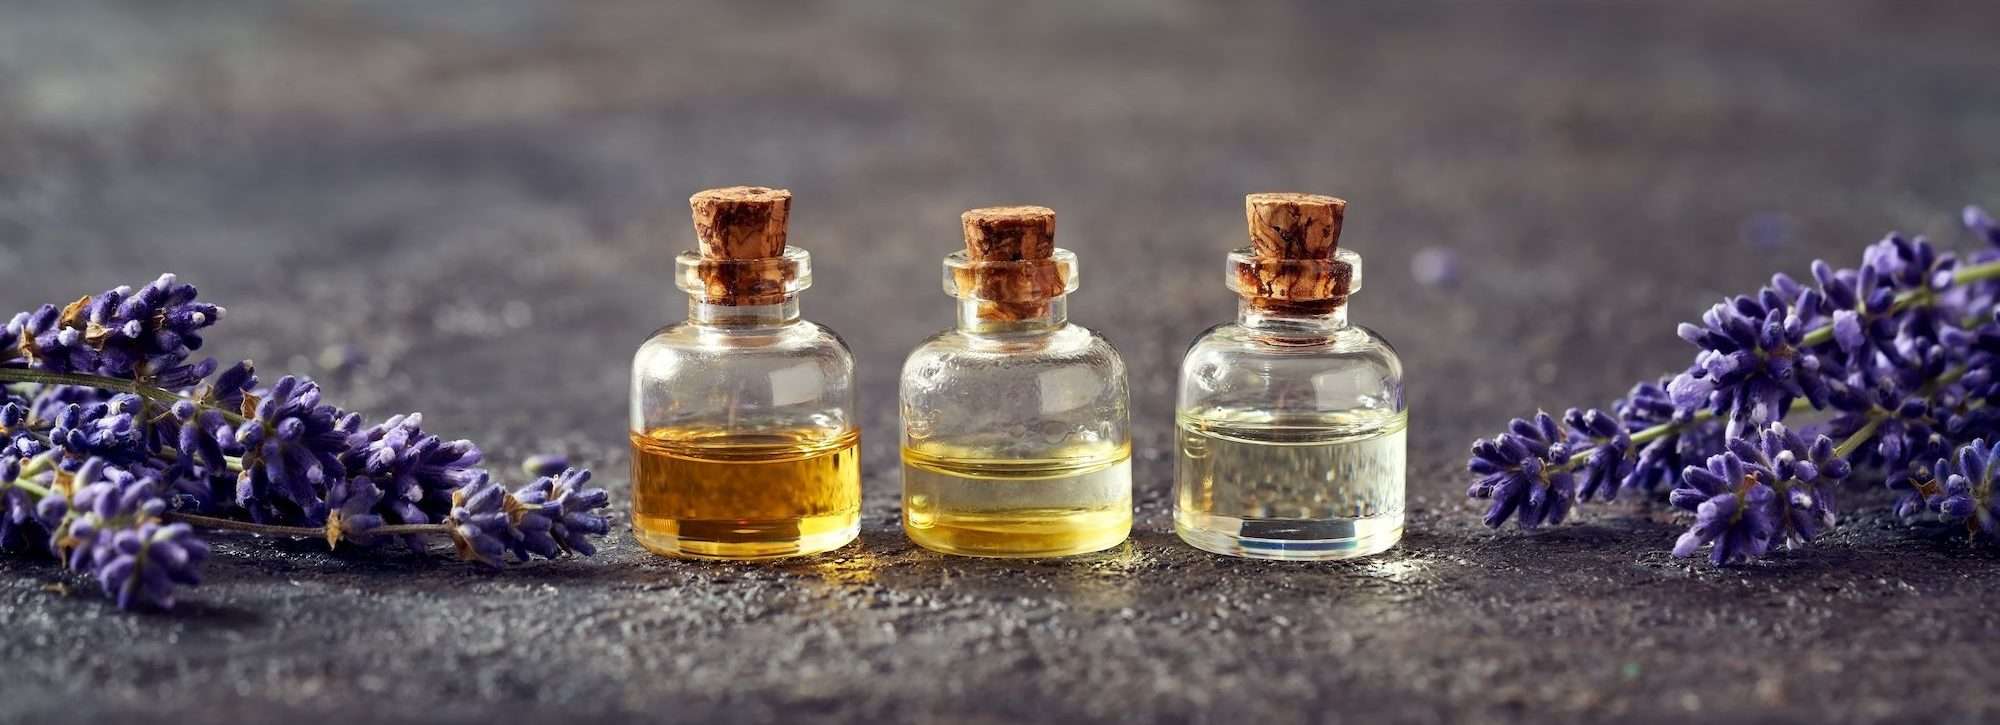 3 bottles of essential oils in a row with bundles of dried lavender on each side